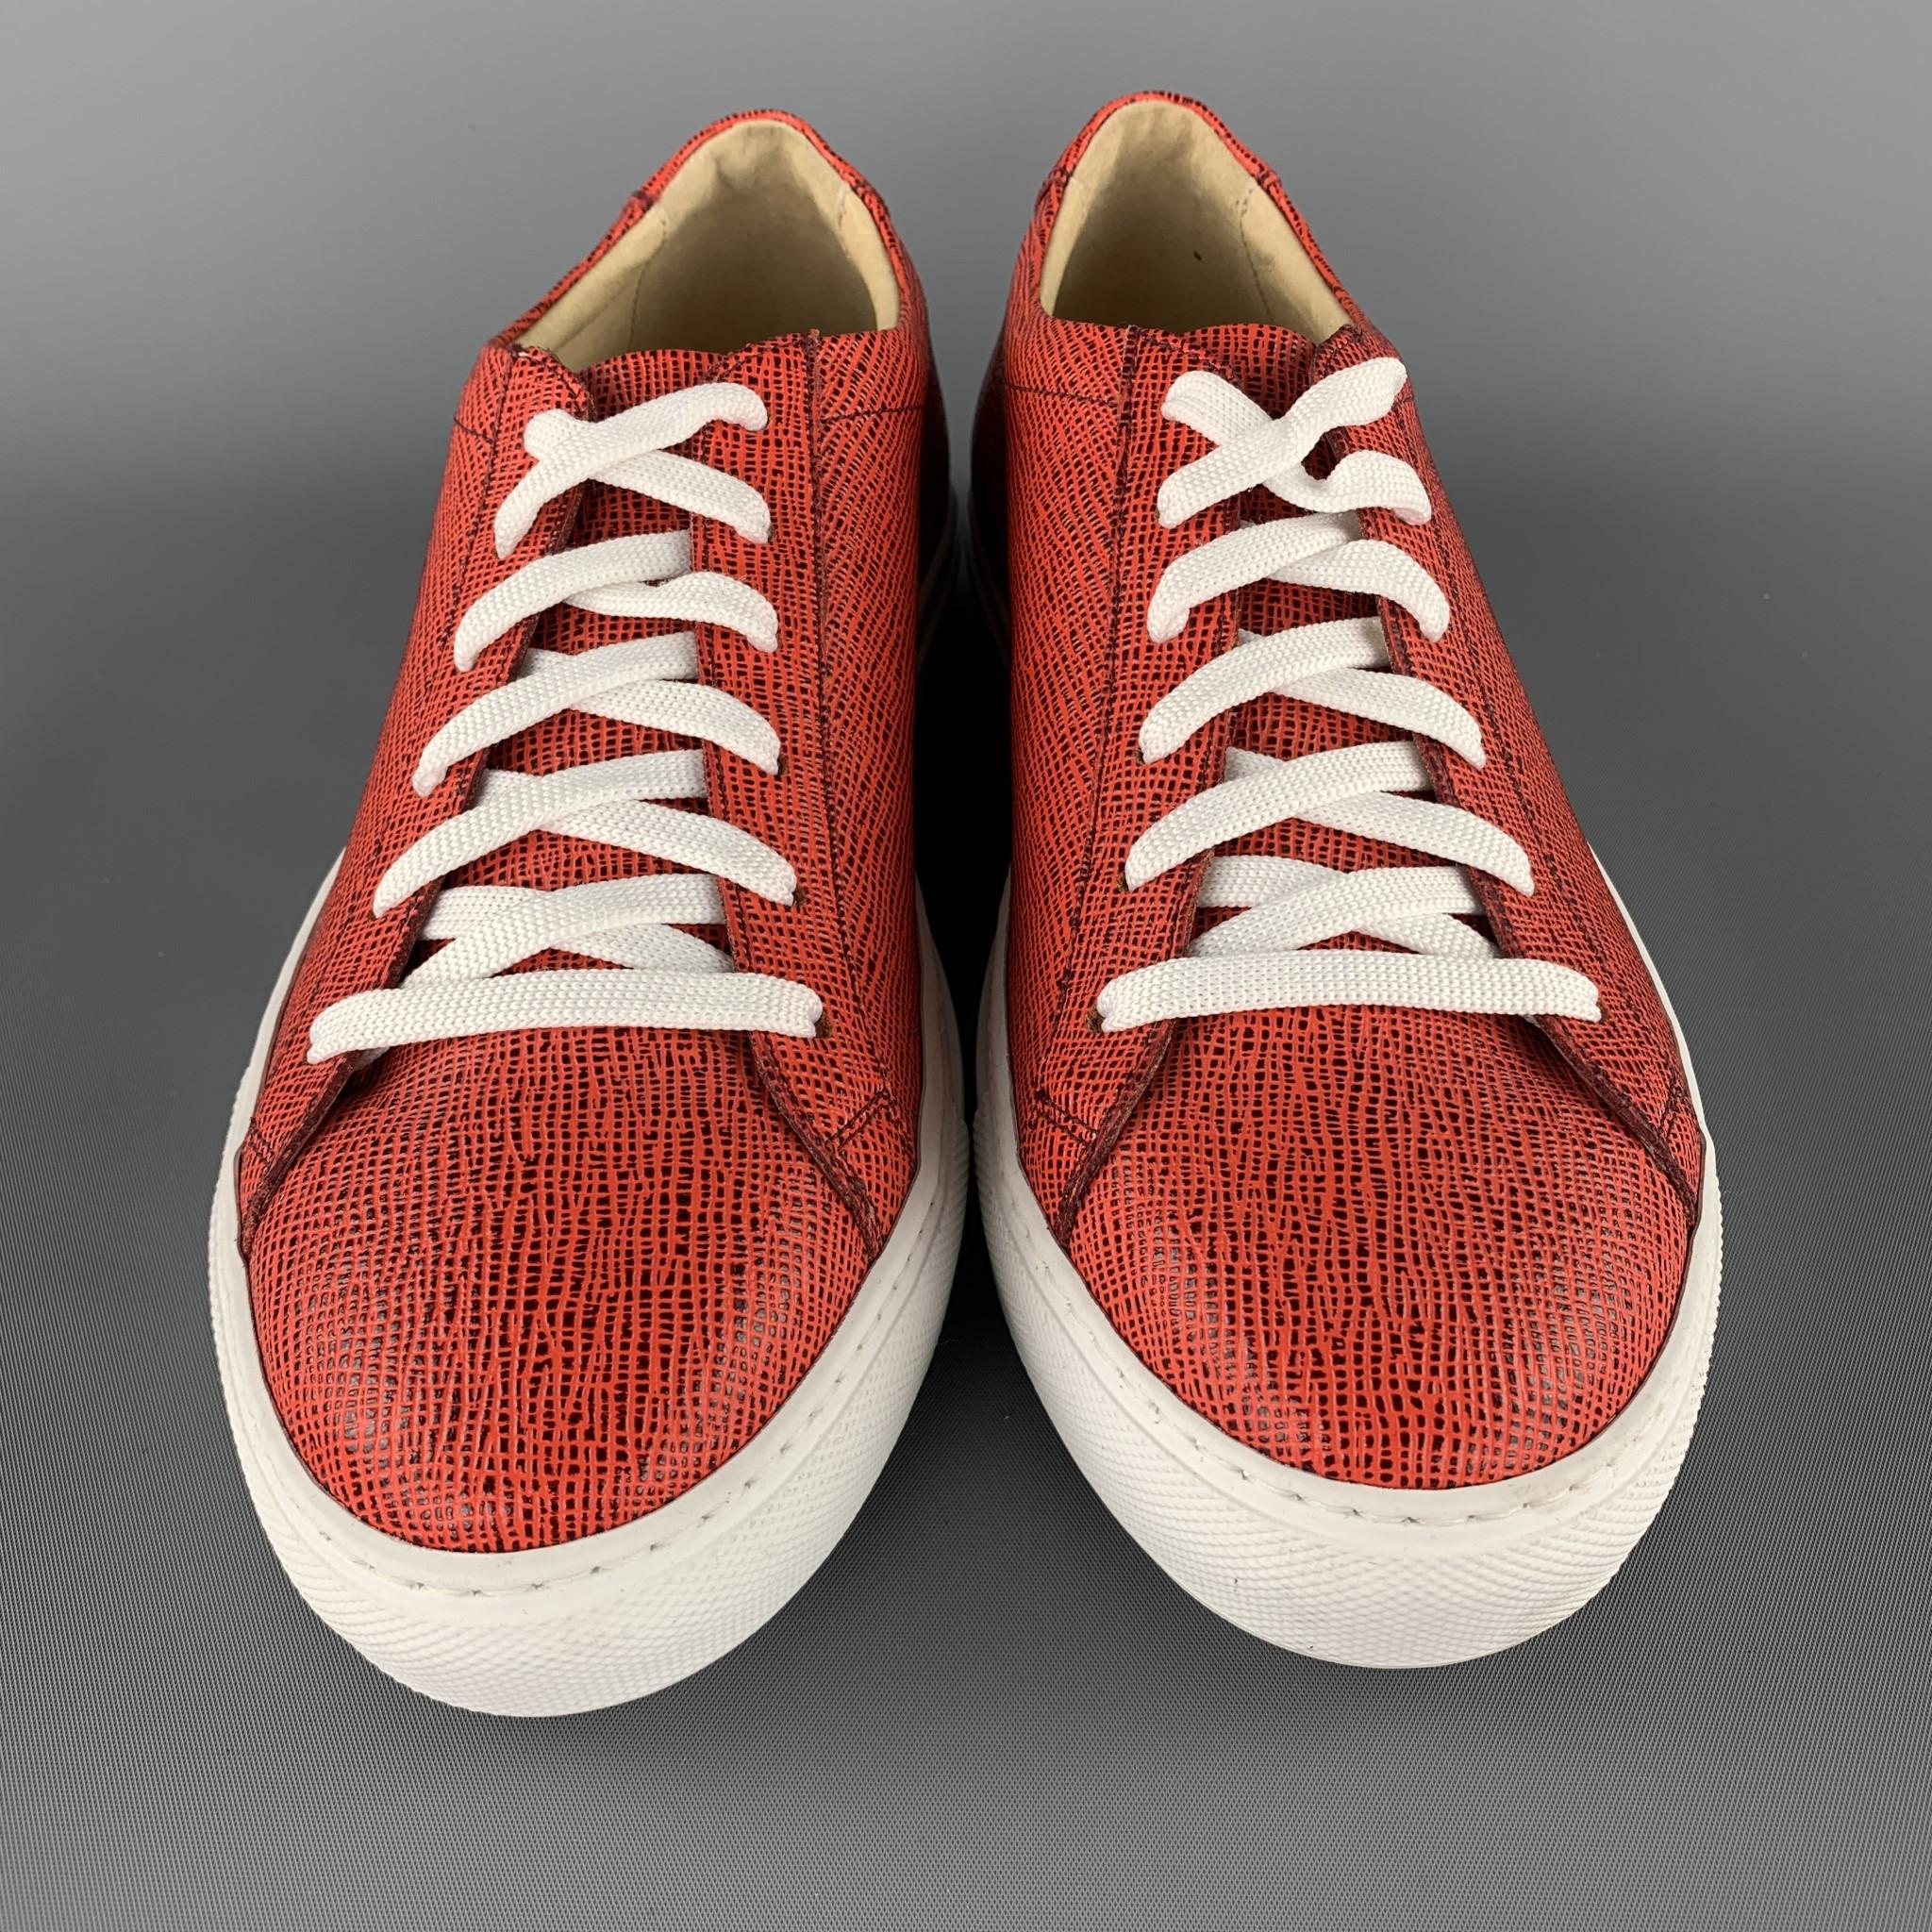 BARNEY'S NEW YORK low top sneakers come in orange and black textured leather with a white rubber sole.  Made in Italy.

Brand New.
Marked: US 8

Outsole: 11.25 x 3.75 in.
SKU: 104005